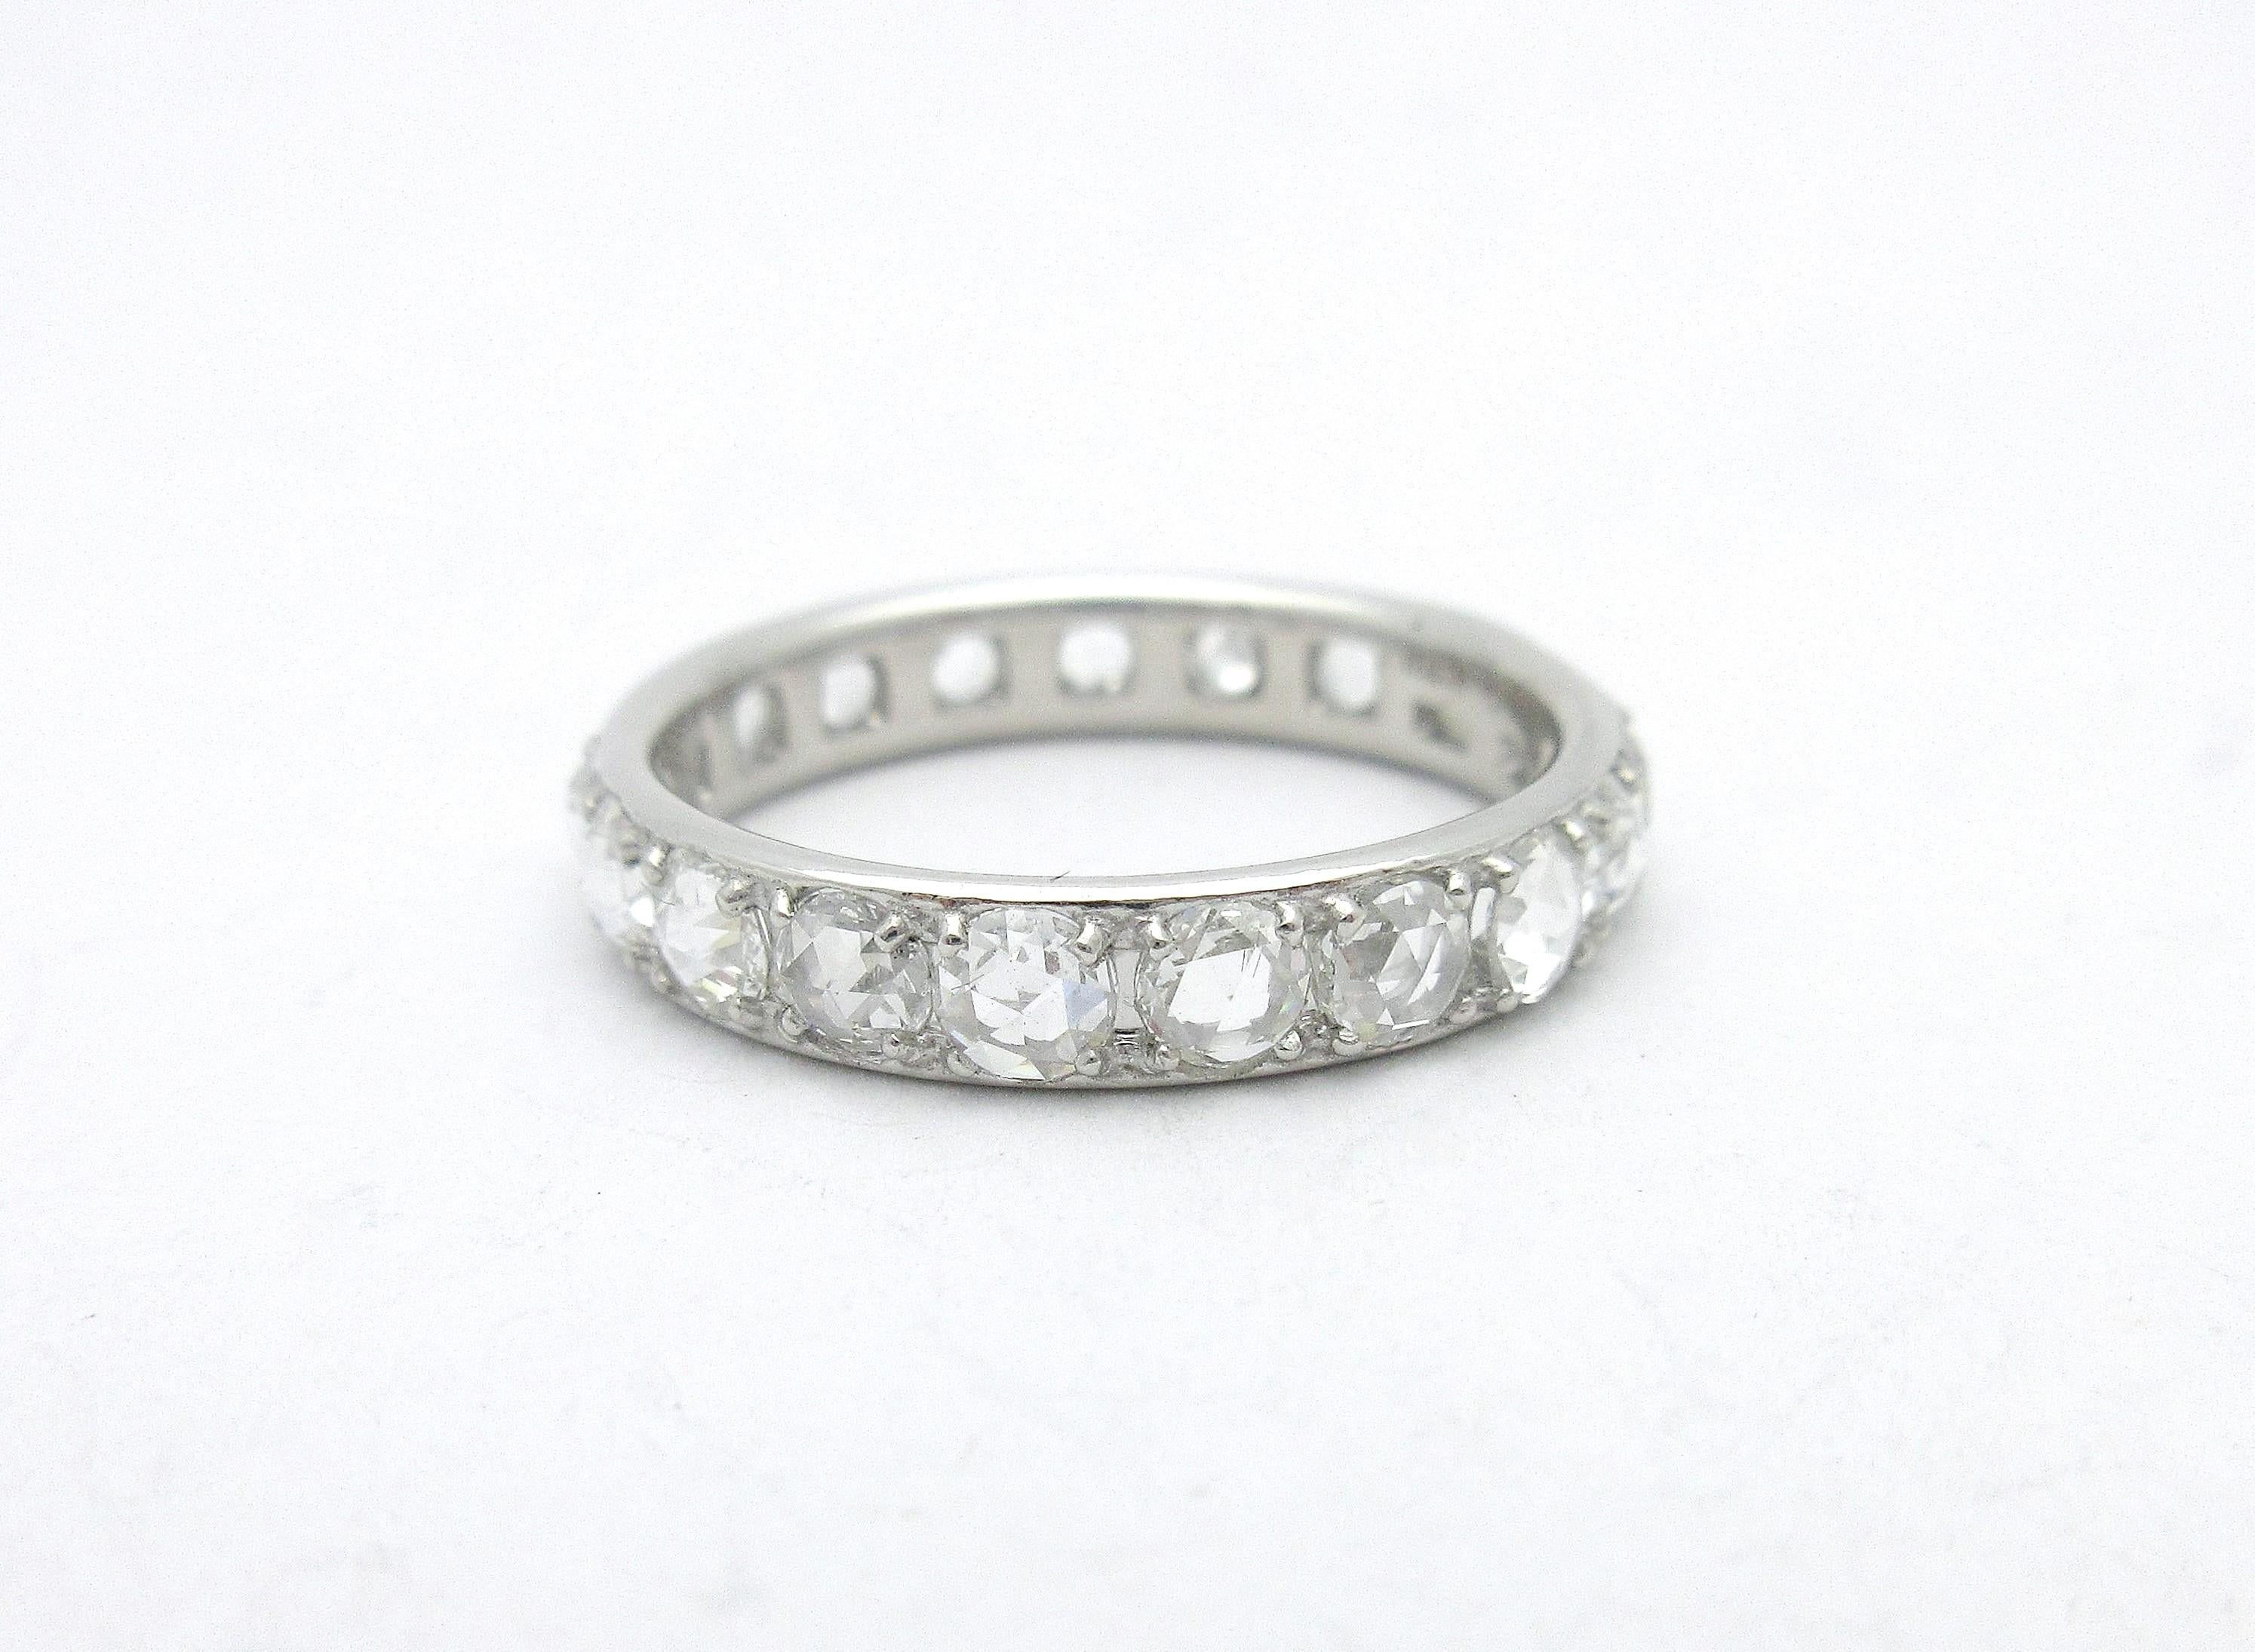 This gorgeous Tiffany & Co eternity band from the Metro Collection brings antiquity into the mainstream. The 18k white gold ring is set with sparkling rose cut diamonds weighing approximately 1.14cttw. The 3.75mm band can be stacked with other